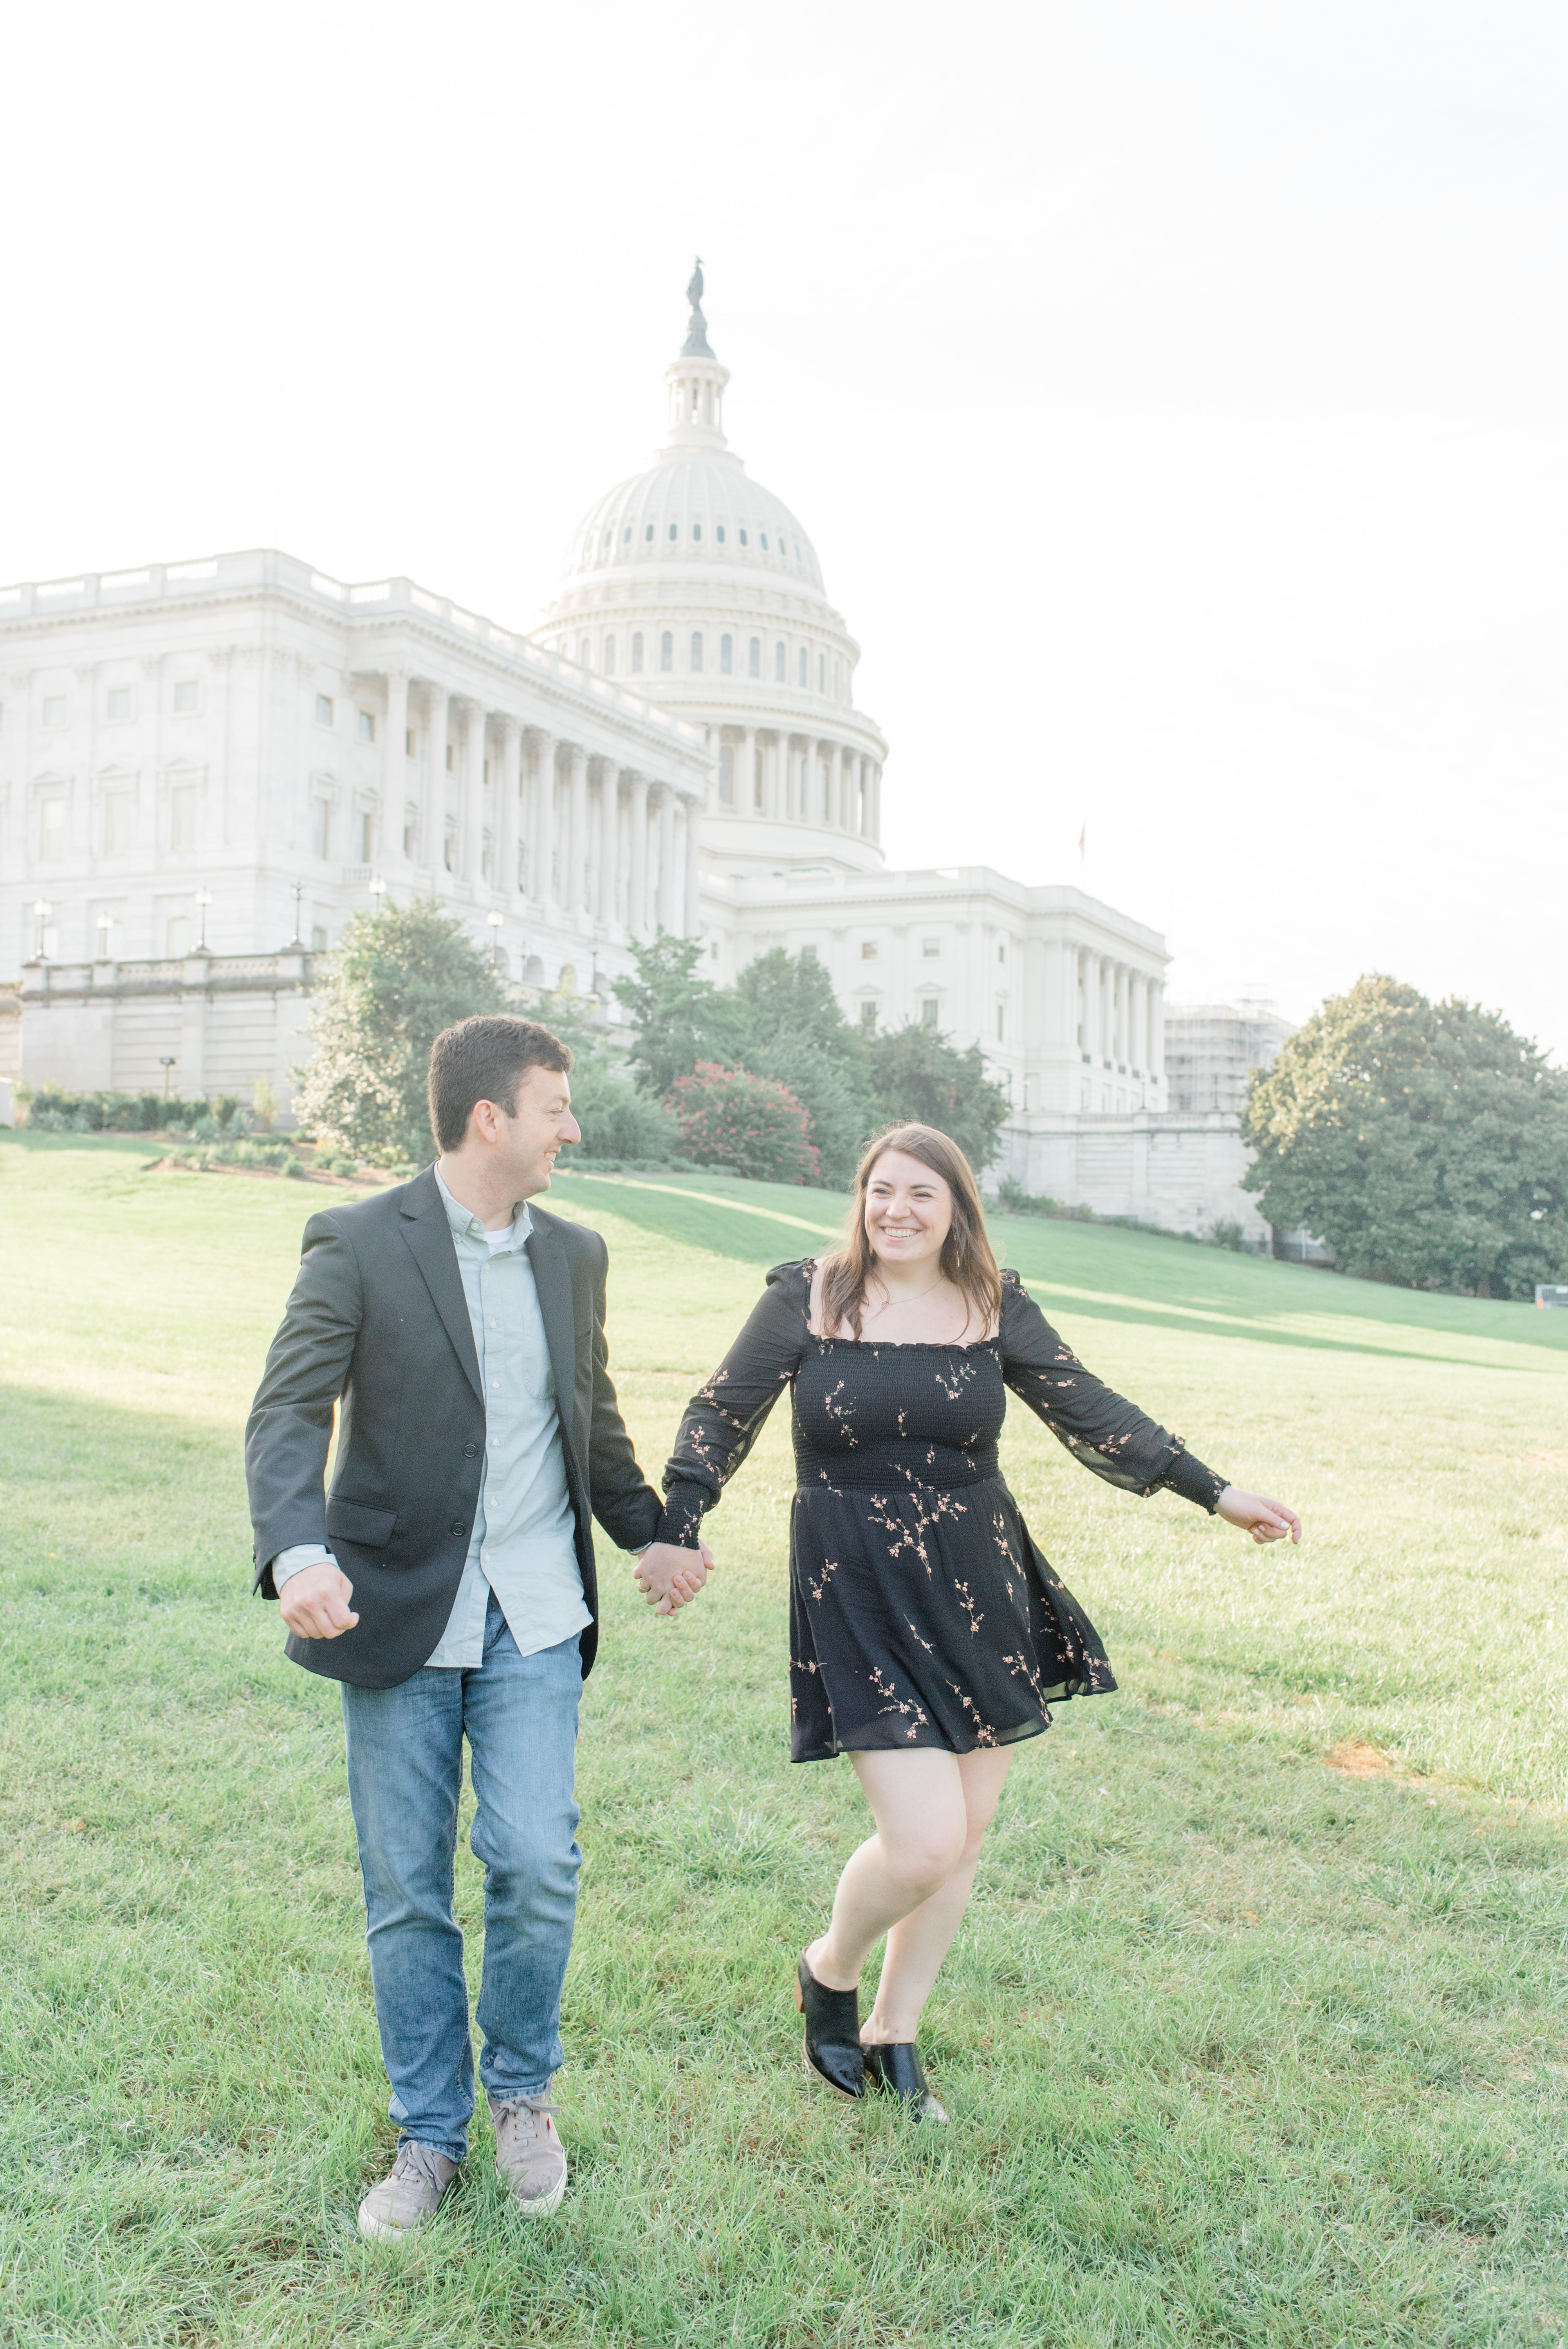 Taking engagement photos at the United States Capitol building in Washington DC.